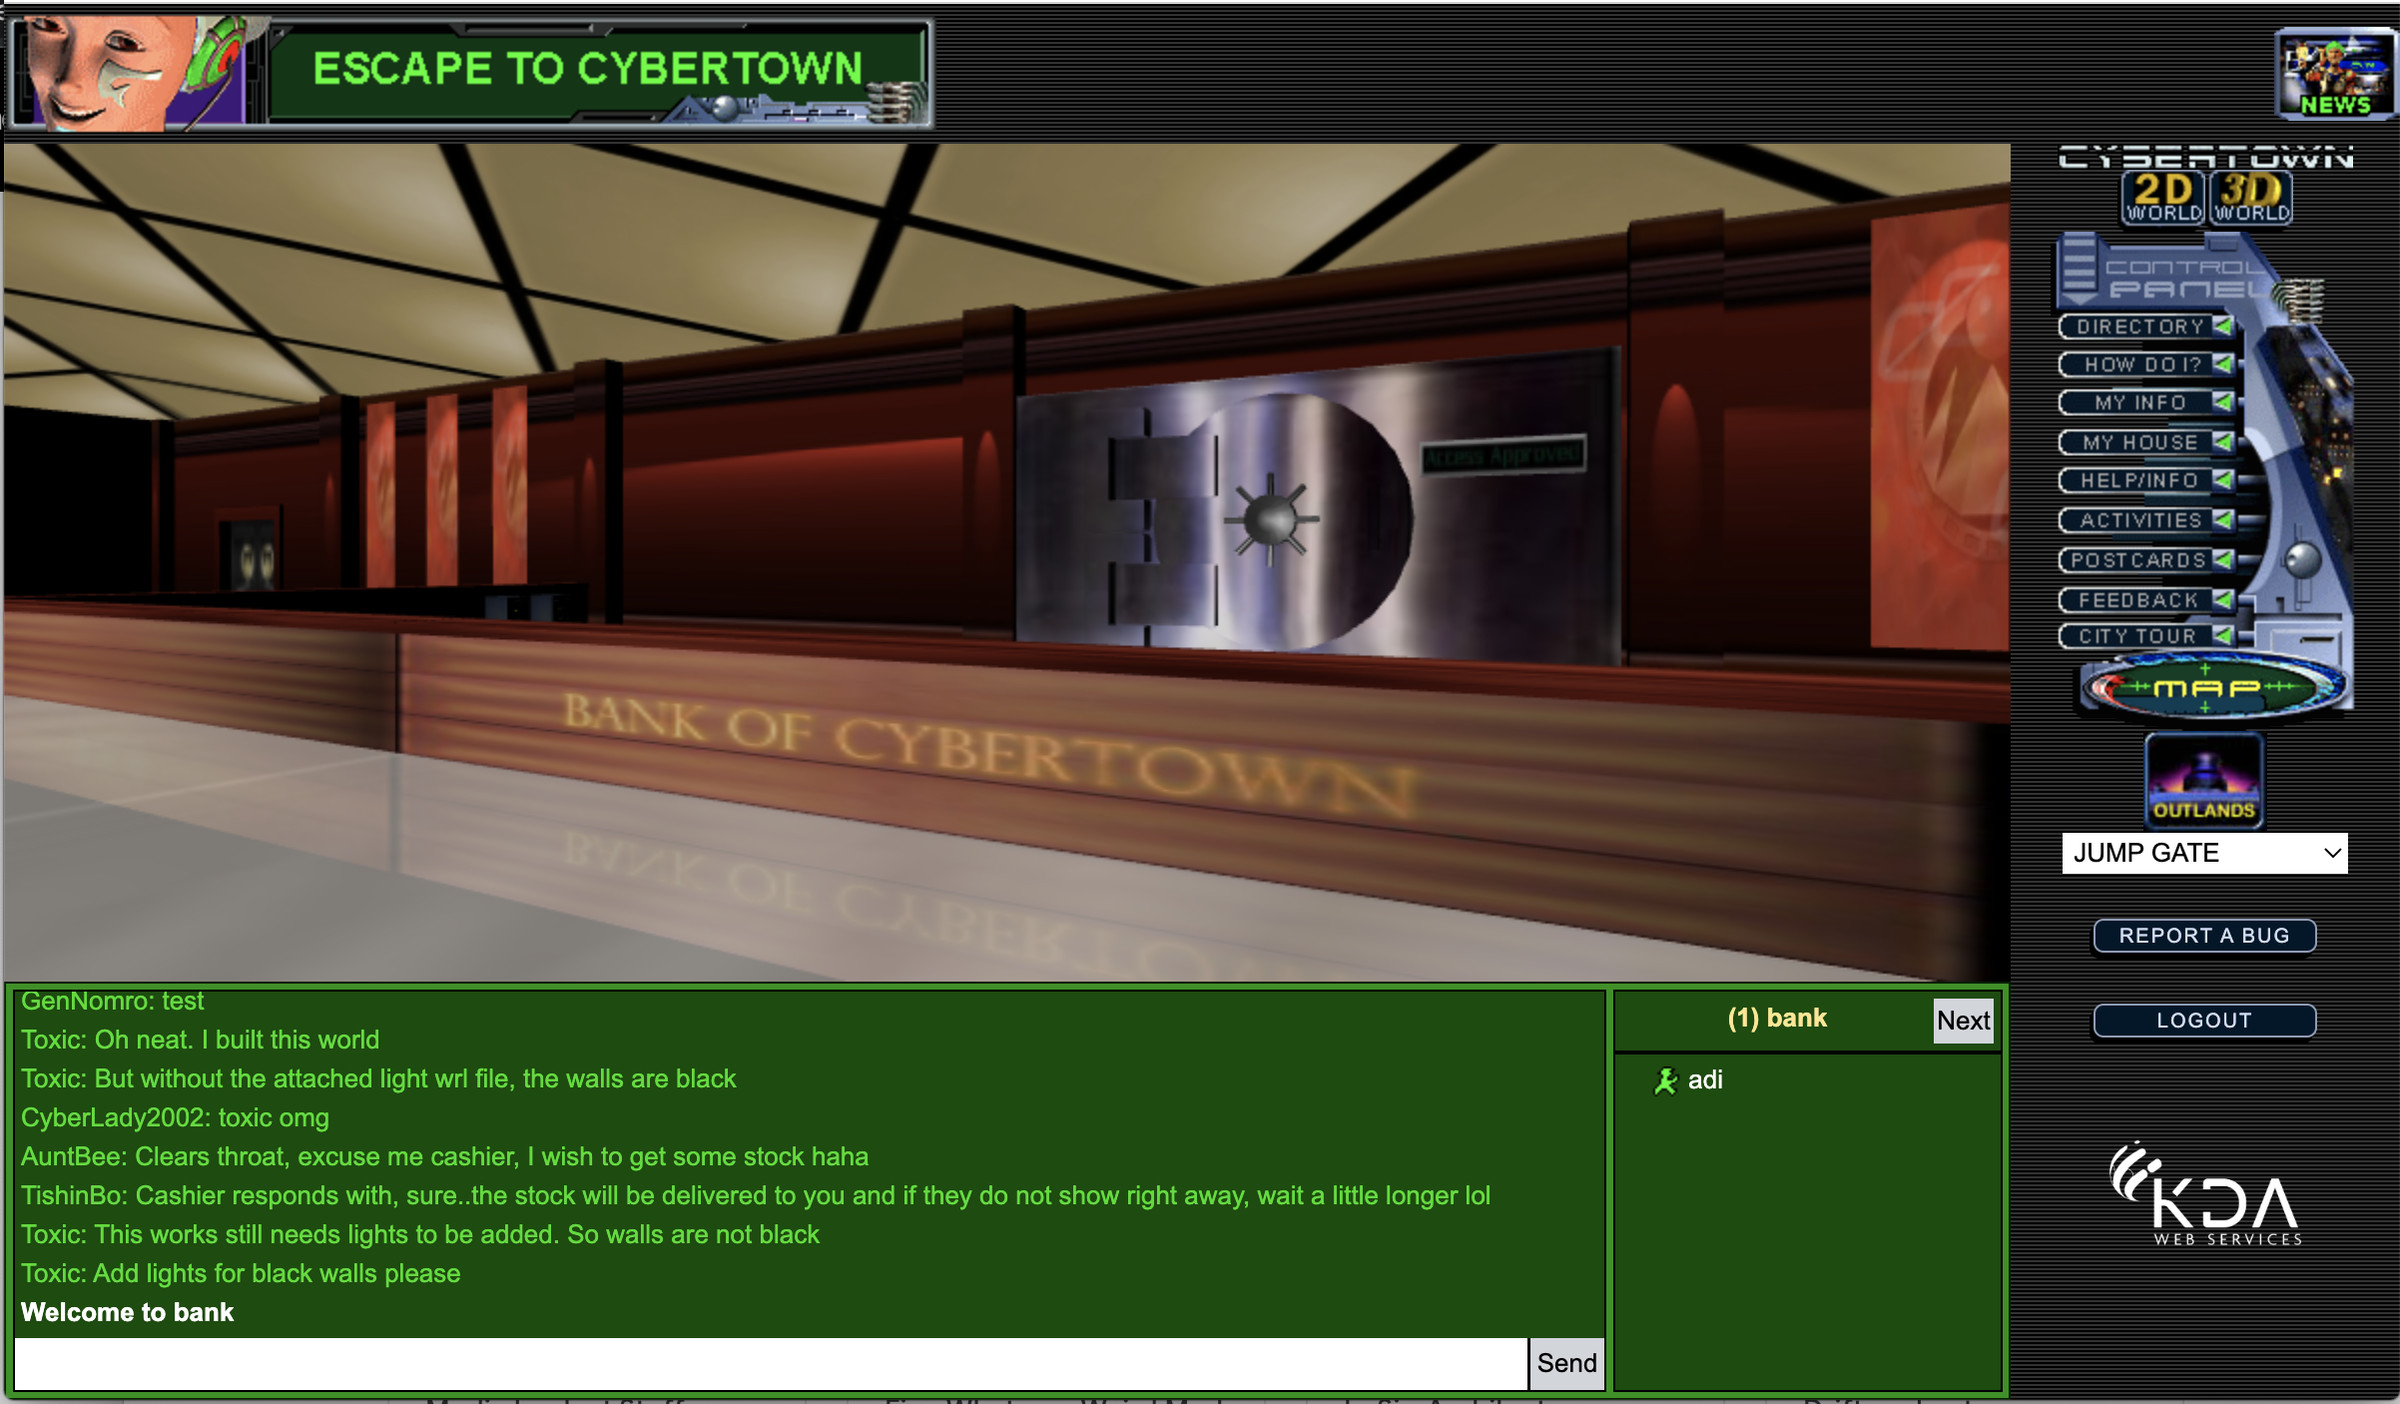 A screenshot of Cybertown’s bank environment with text chats from users.